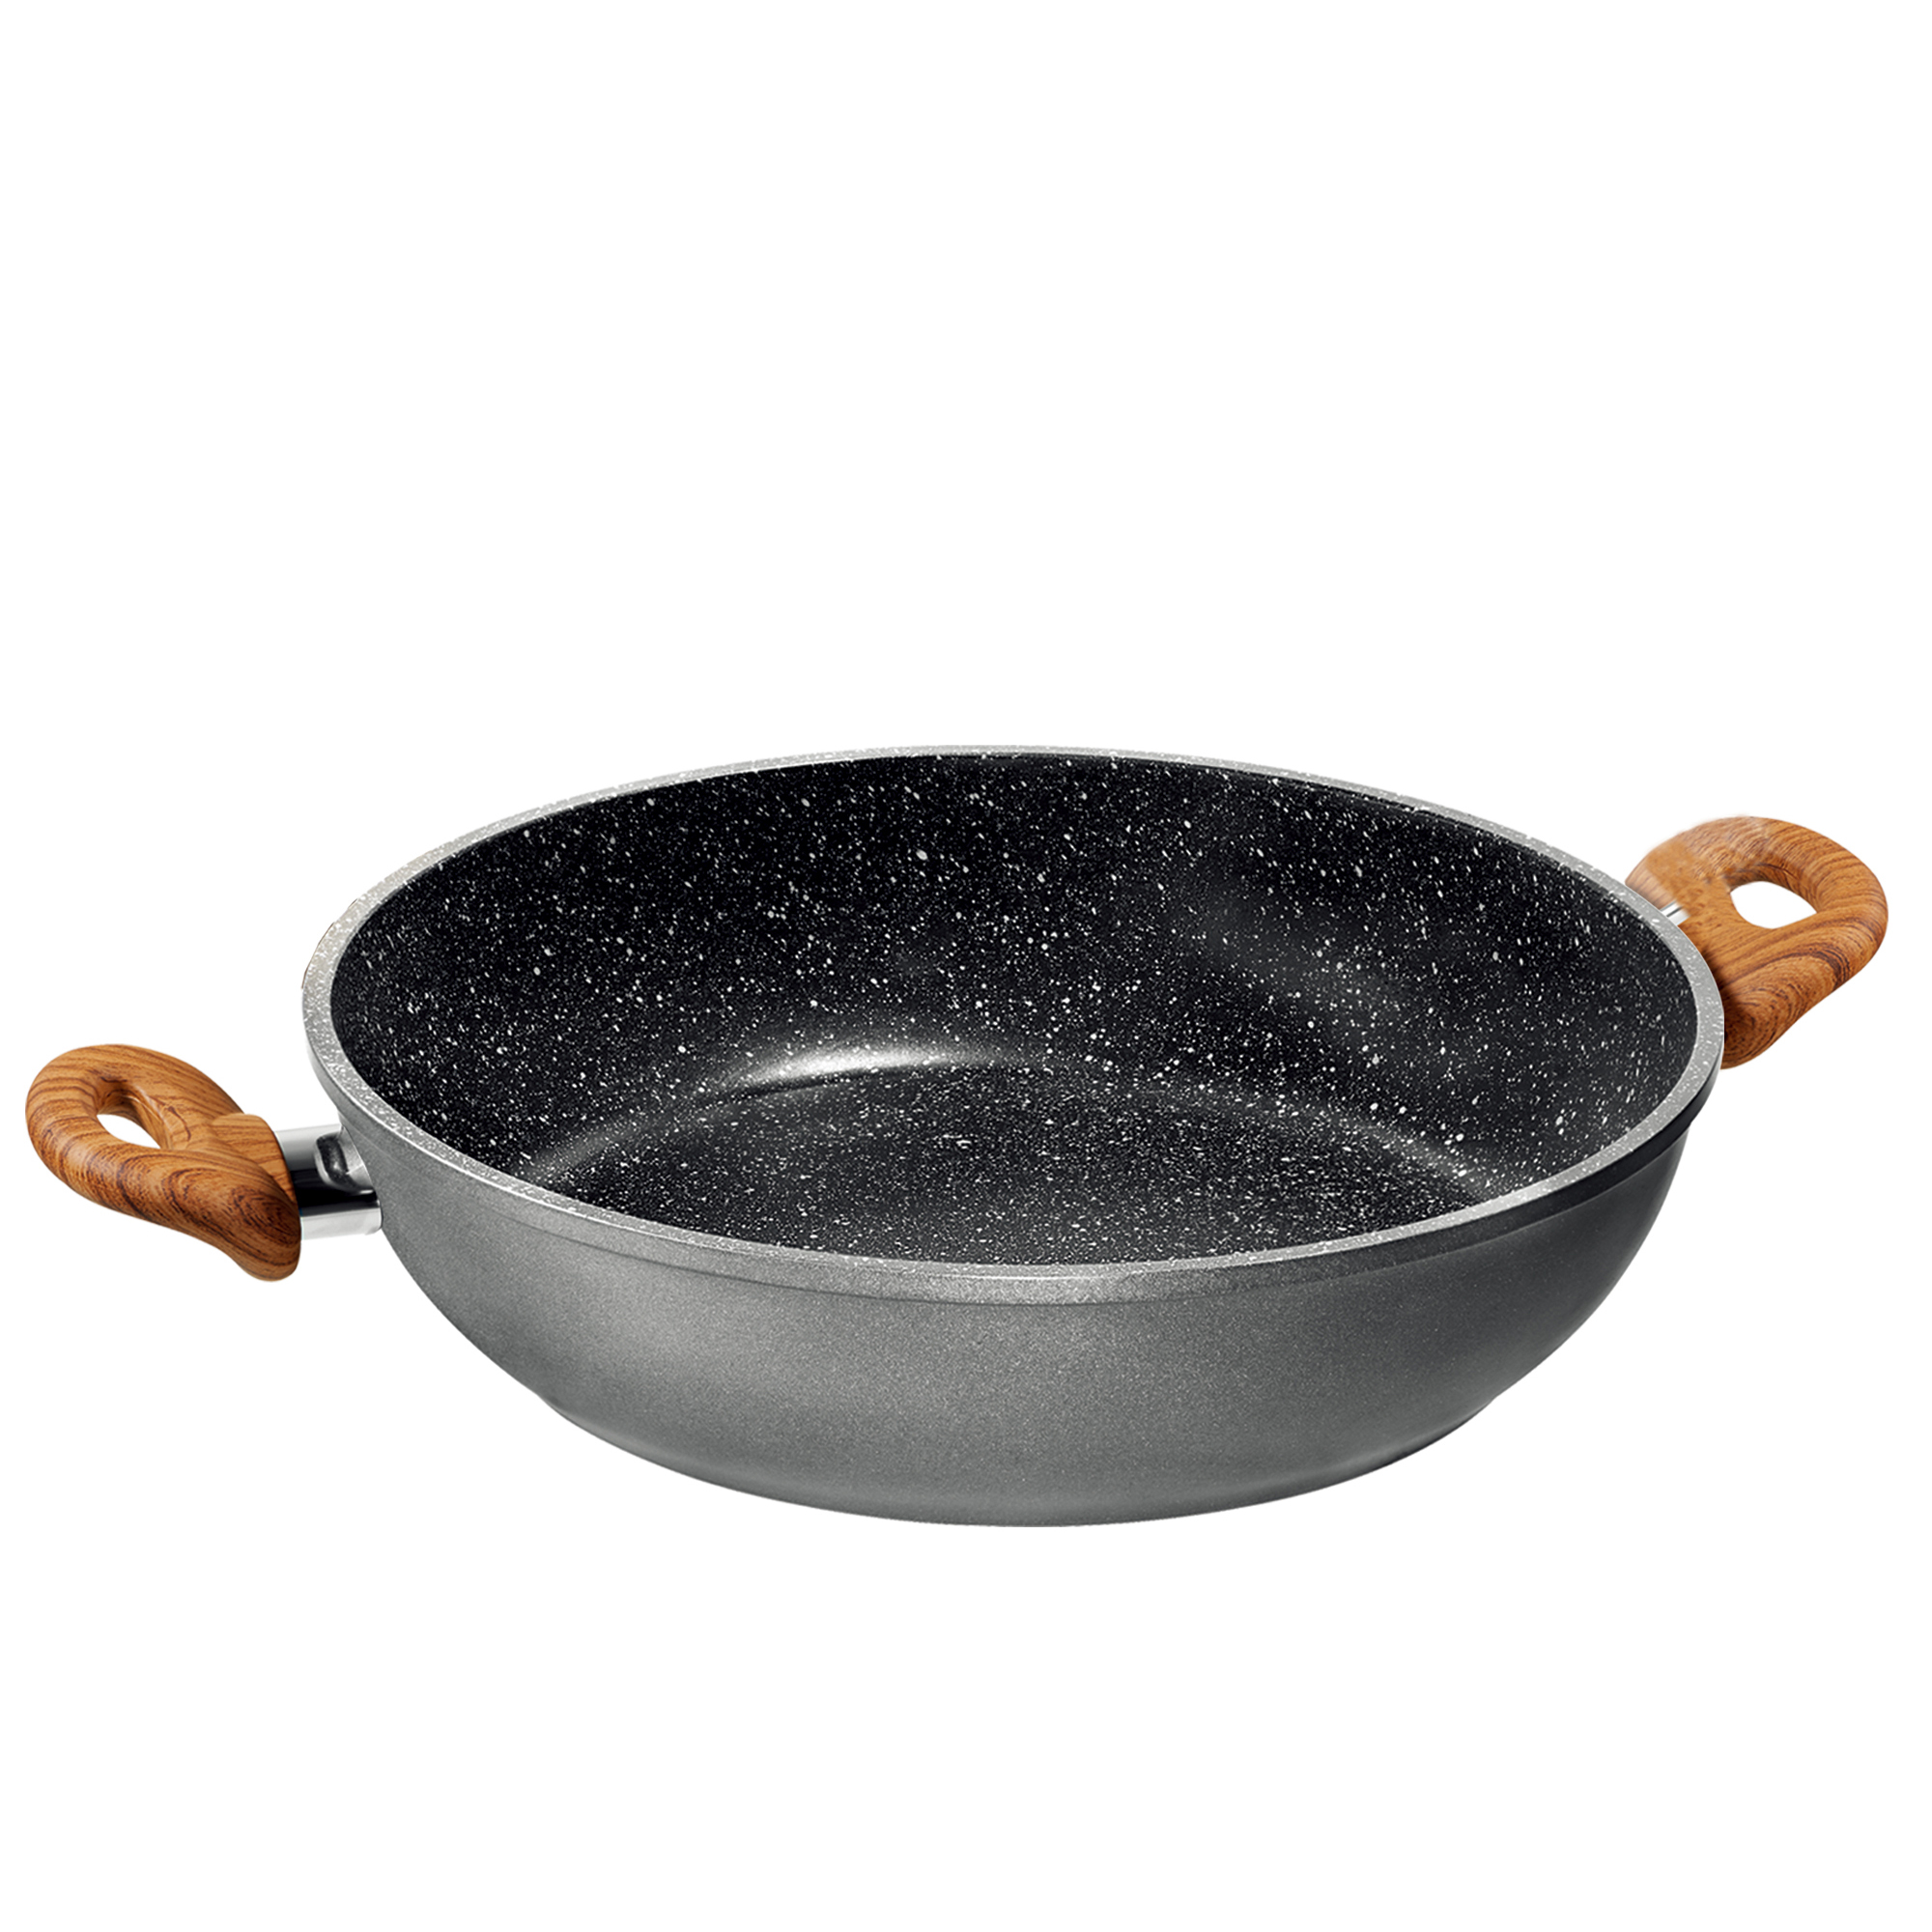 STONELINE® Back to Nature Serving Pan, Made in Germany